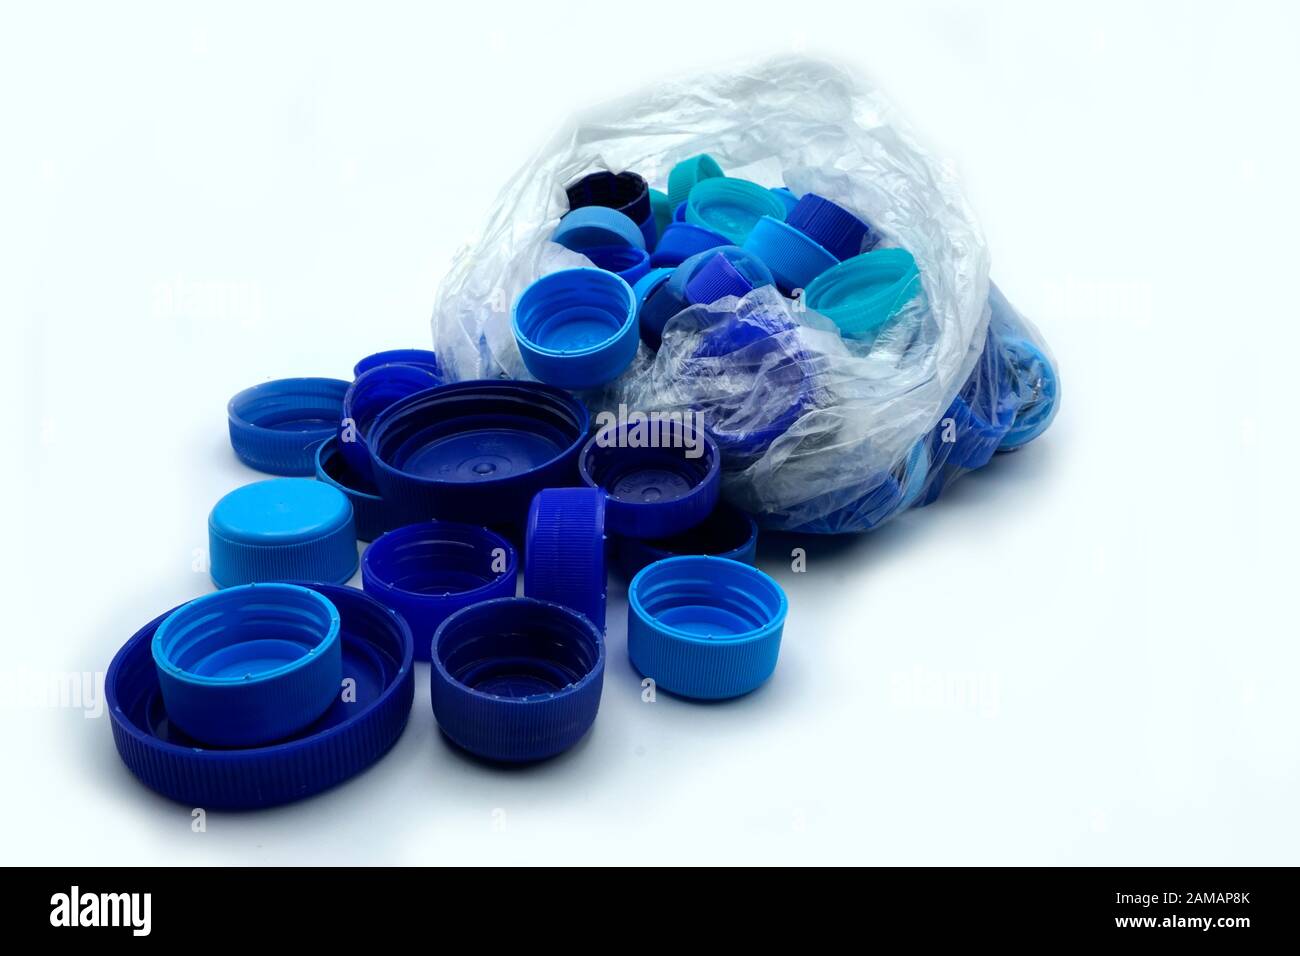 Blue plastic bottle caps sorted by colors in transparent single use plastic bags. PP an PET pollution. Recycling solutions for plastic waste. Stock Photo